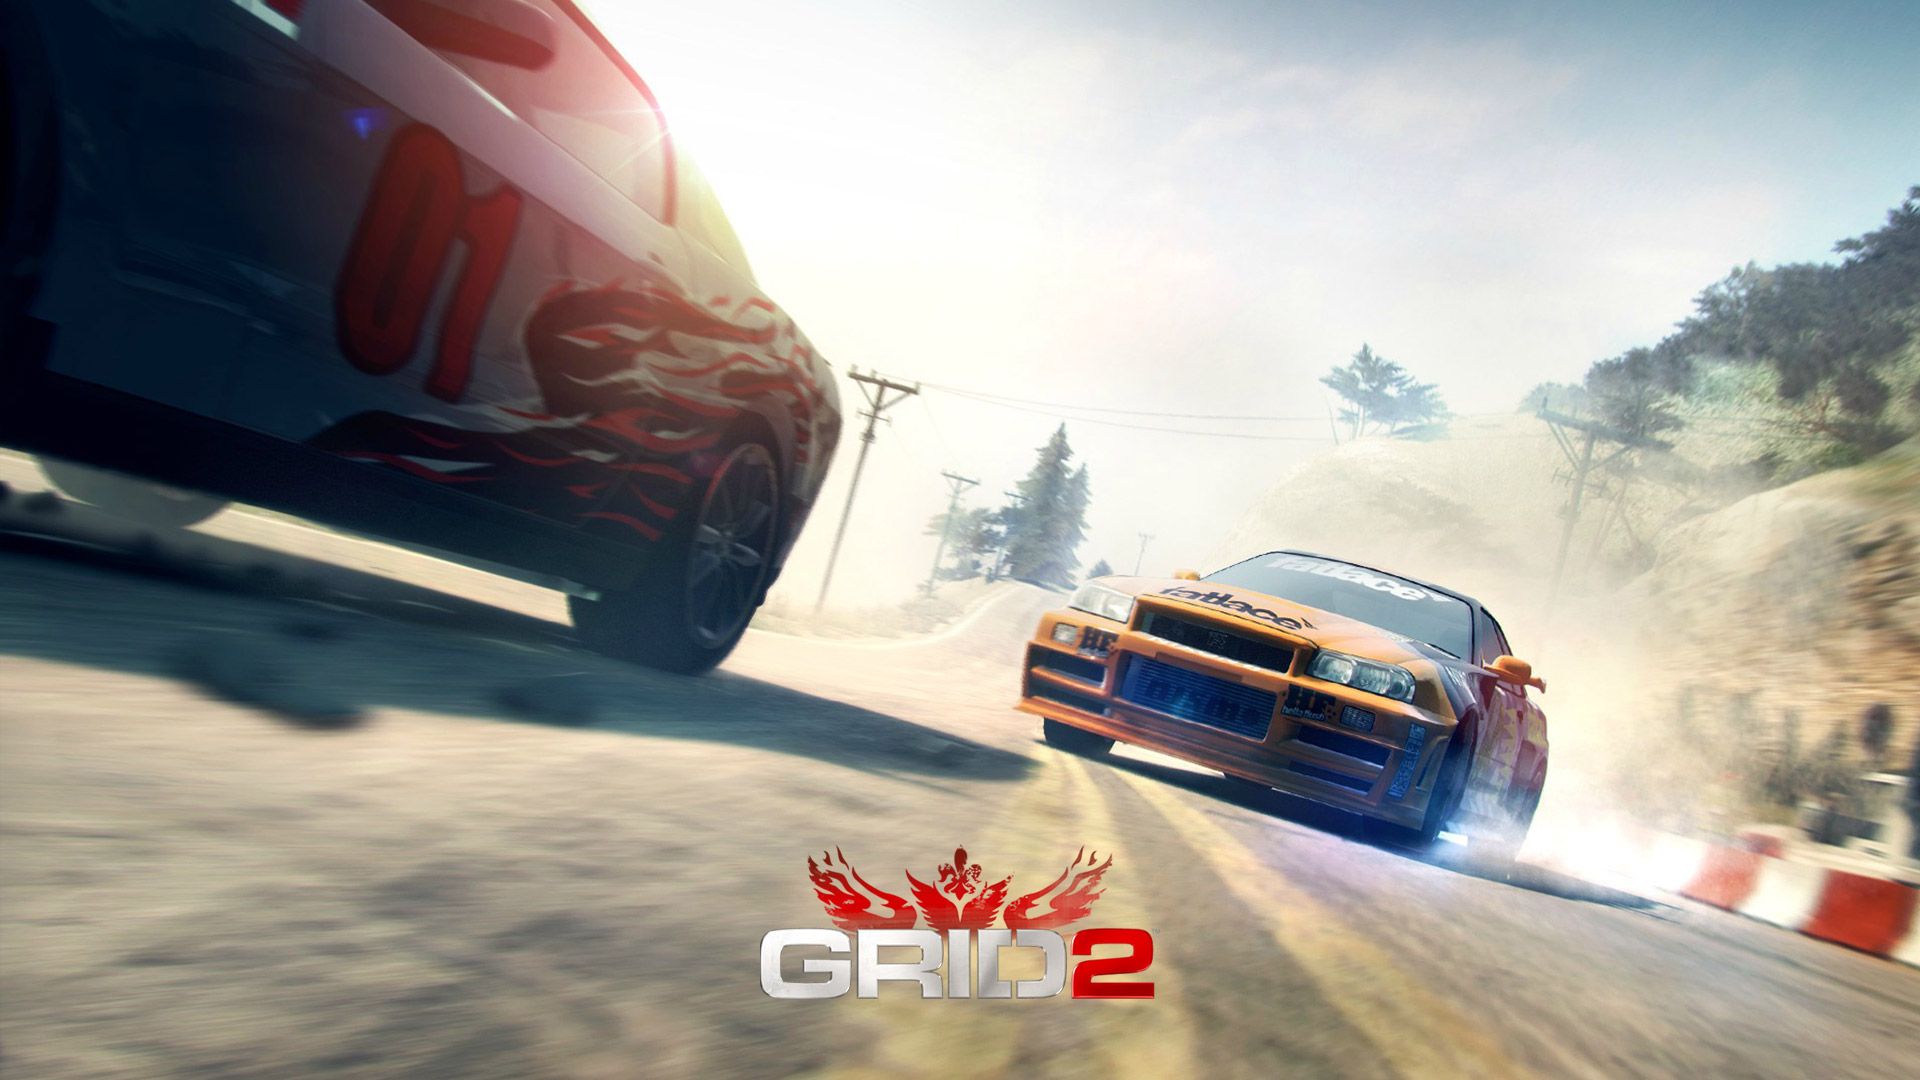 Free GRID 2 Wallpapers in 1920x1080